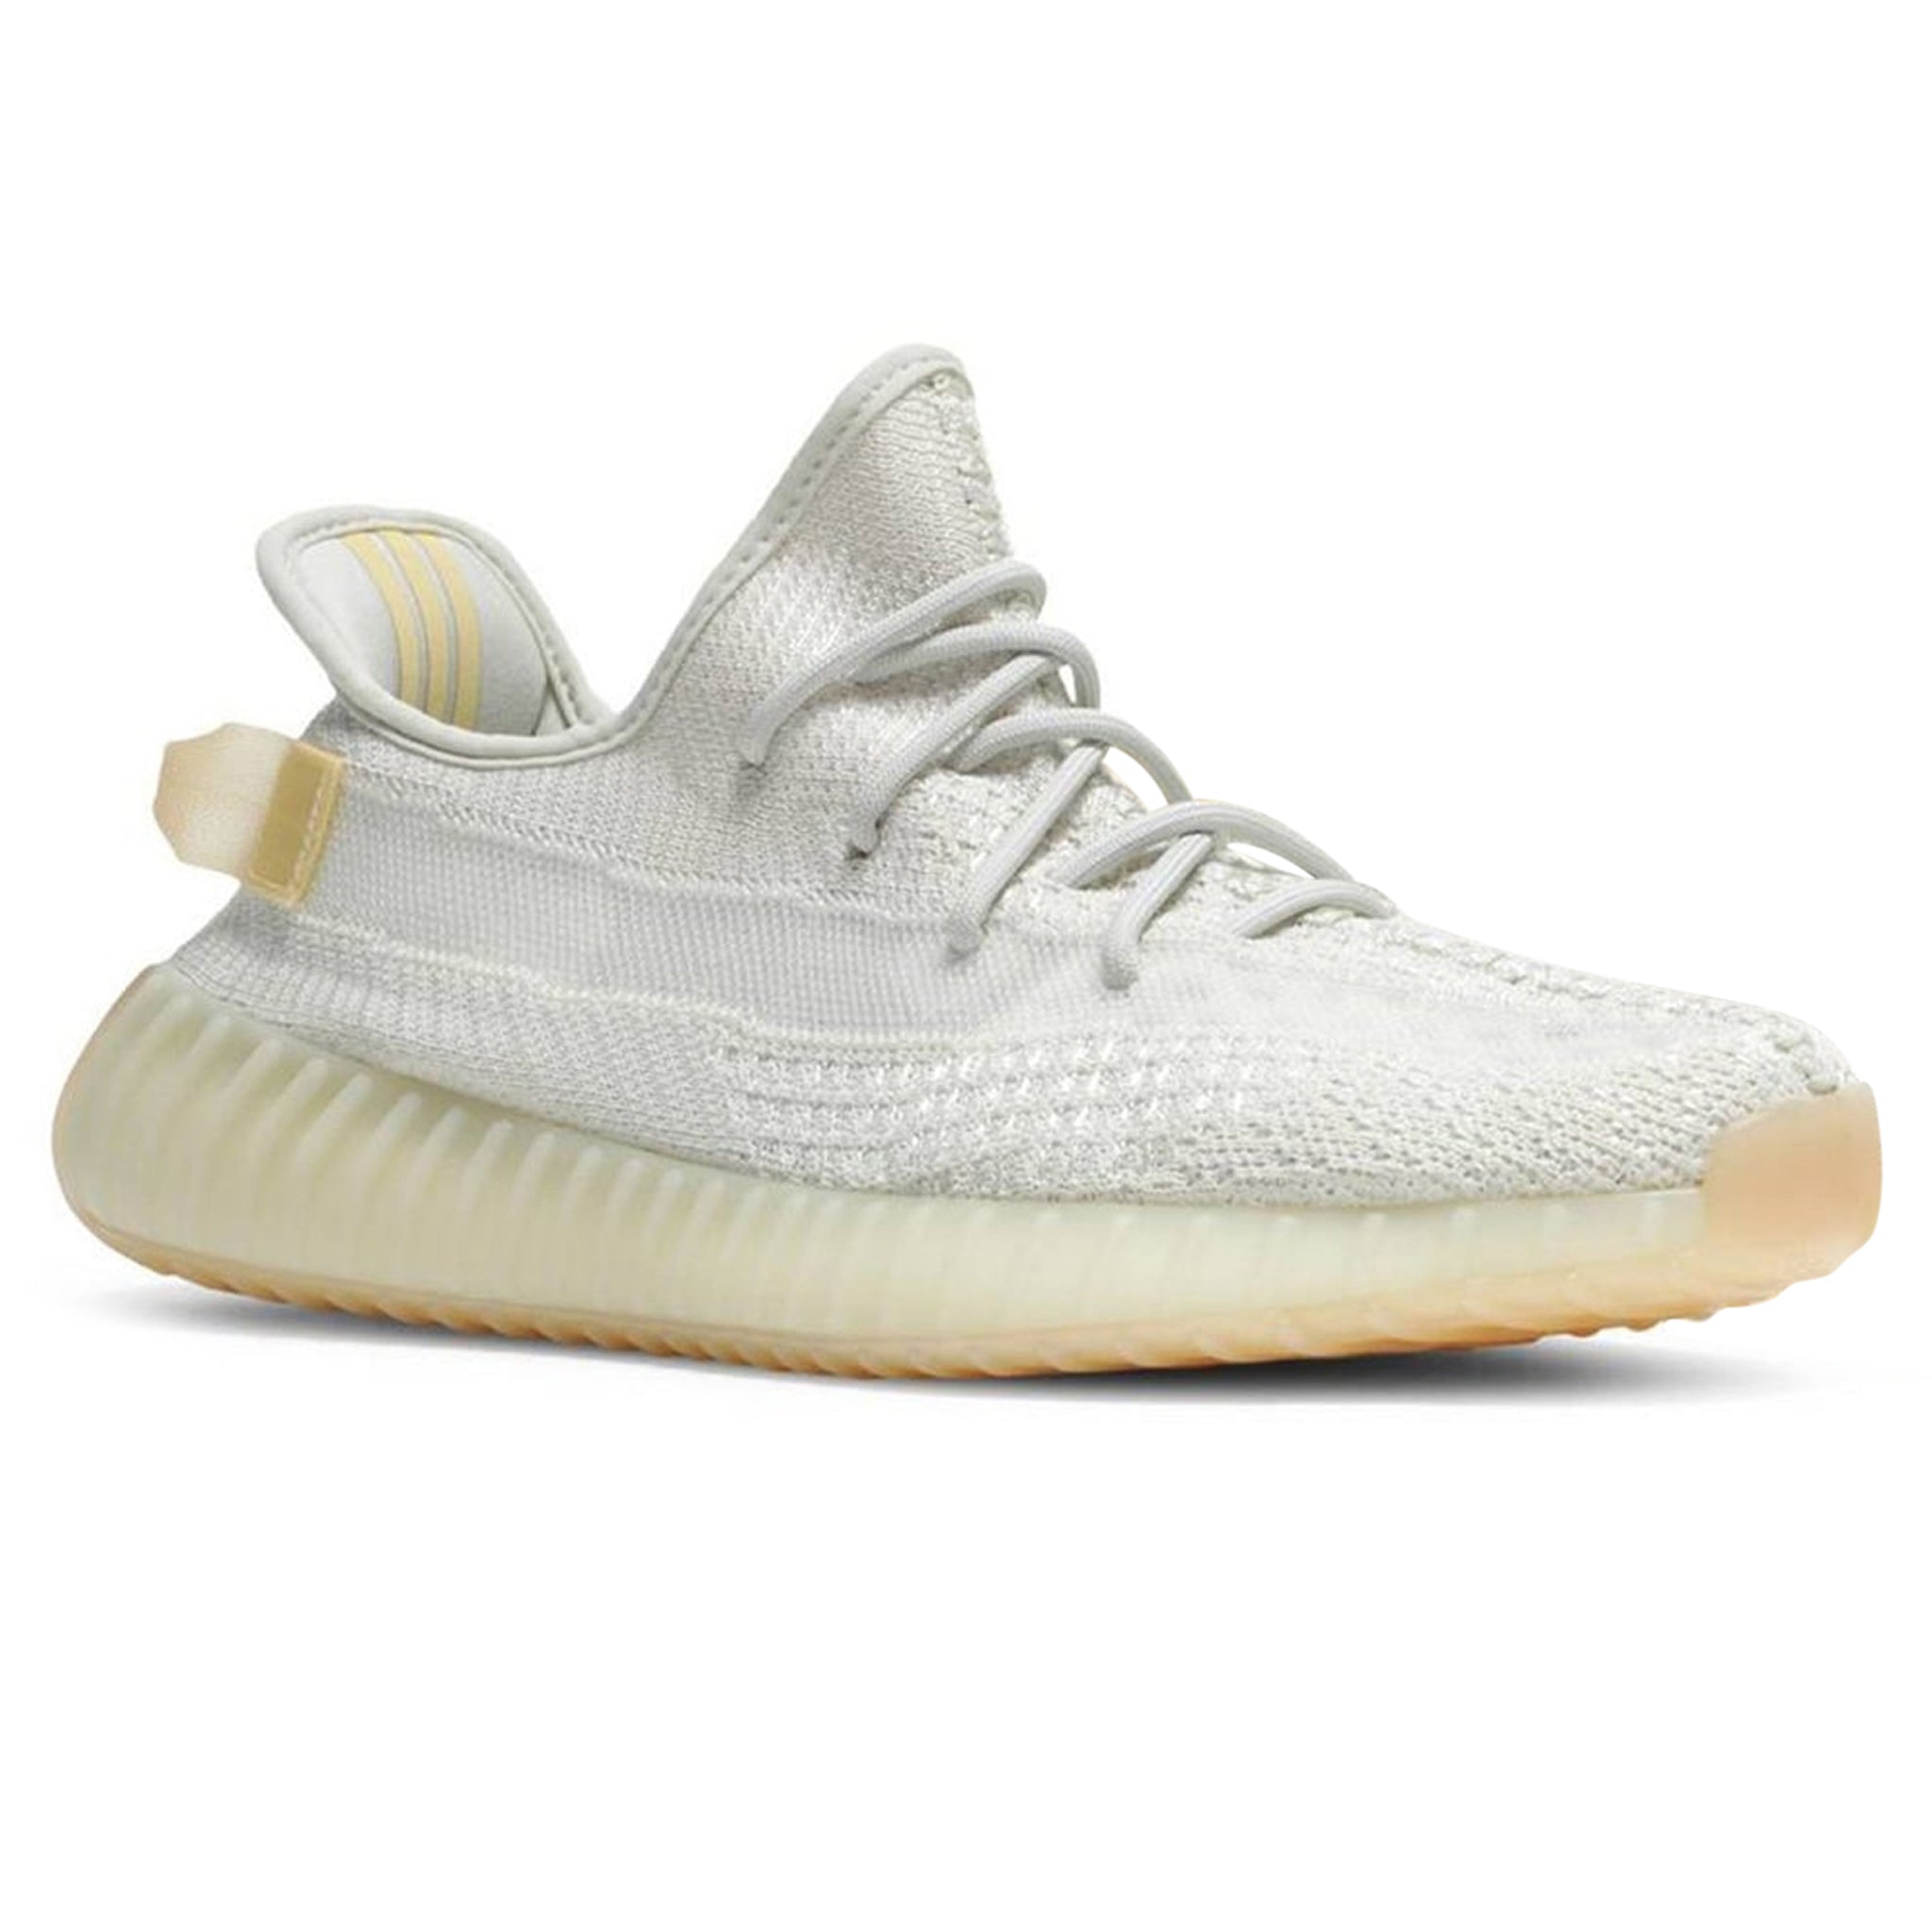 Front view of Adidas Yeezy Boost 350 V2 Light GY3438